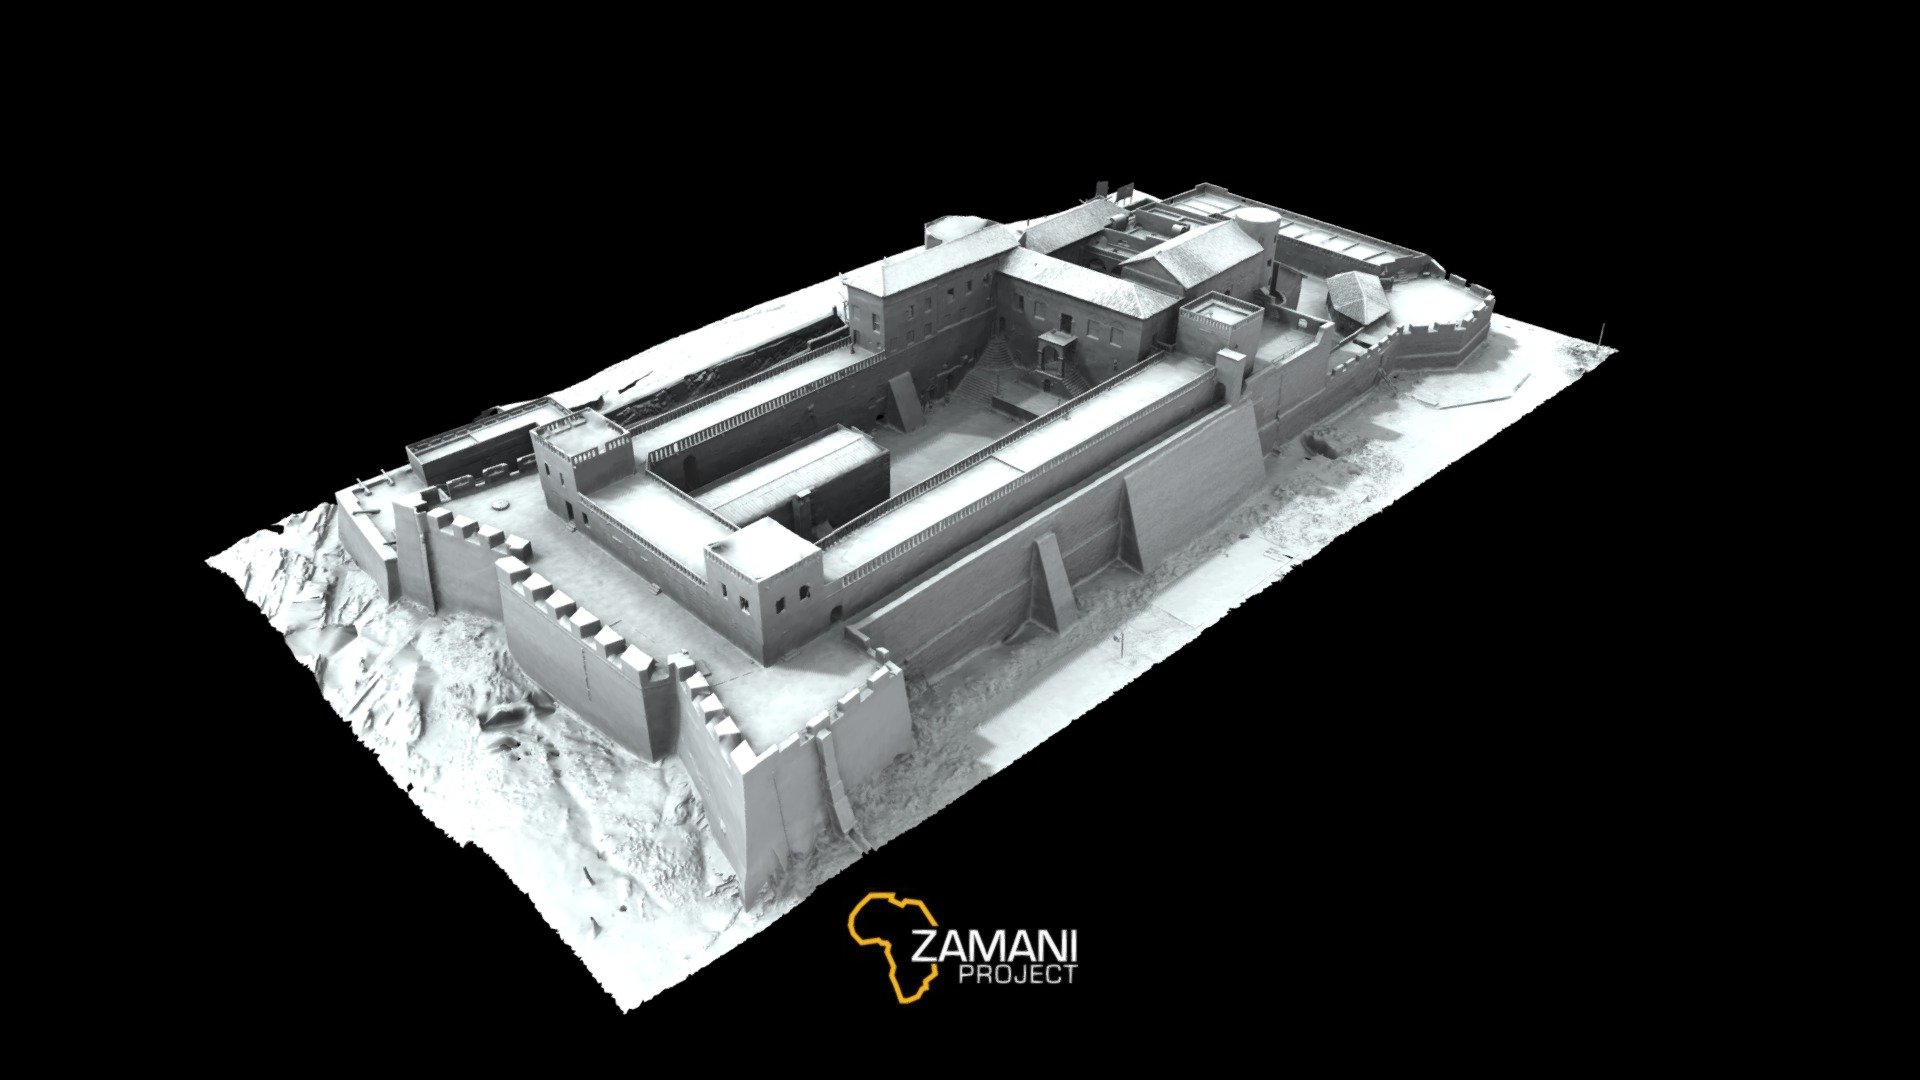 The Zamani Project spatially documented Elmina Castle in 2006, using terrestrial laser scanning.  This data has been reprocessed using Reality Capture in 2020.

Elmina is first European trading post built on the Gulf of Guinea, and recognised as the oldest European building south of the Sahara. It was founded by the Portuguese in 1482, taken over by the Dutch in the 17th century and the British in the late 19th century.
Elmina Castle and other forts and castles in the area were important links in the trade routes established during the era of maritime exploration, and served the gold trade and the transatlantic slave trade.
They are significant historical sites of European-African engagement, as well as the starting point of the African diaspora. Elmina Castle and other fortified trading-posts in Ghana are UNESCO World Heritage Sites 3d model